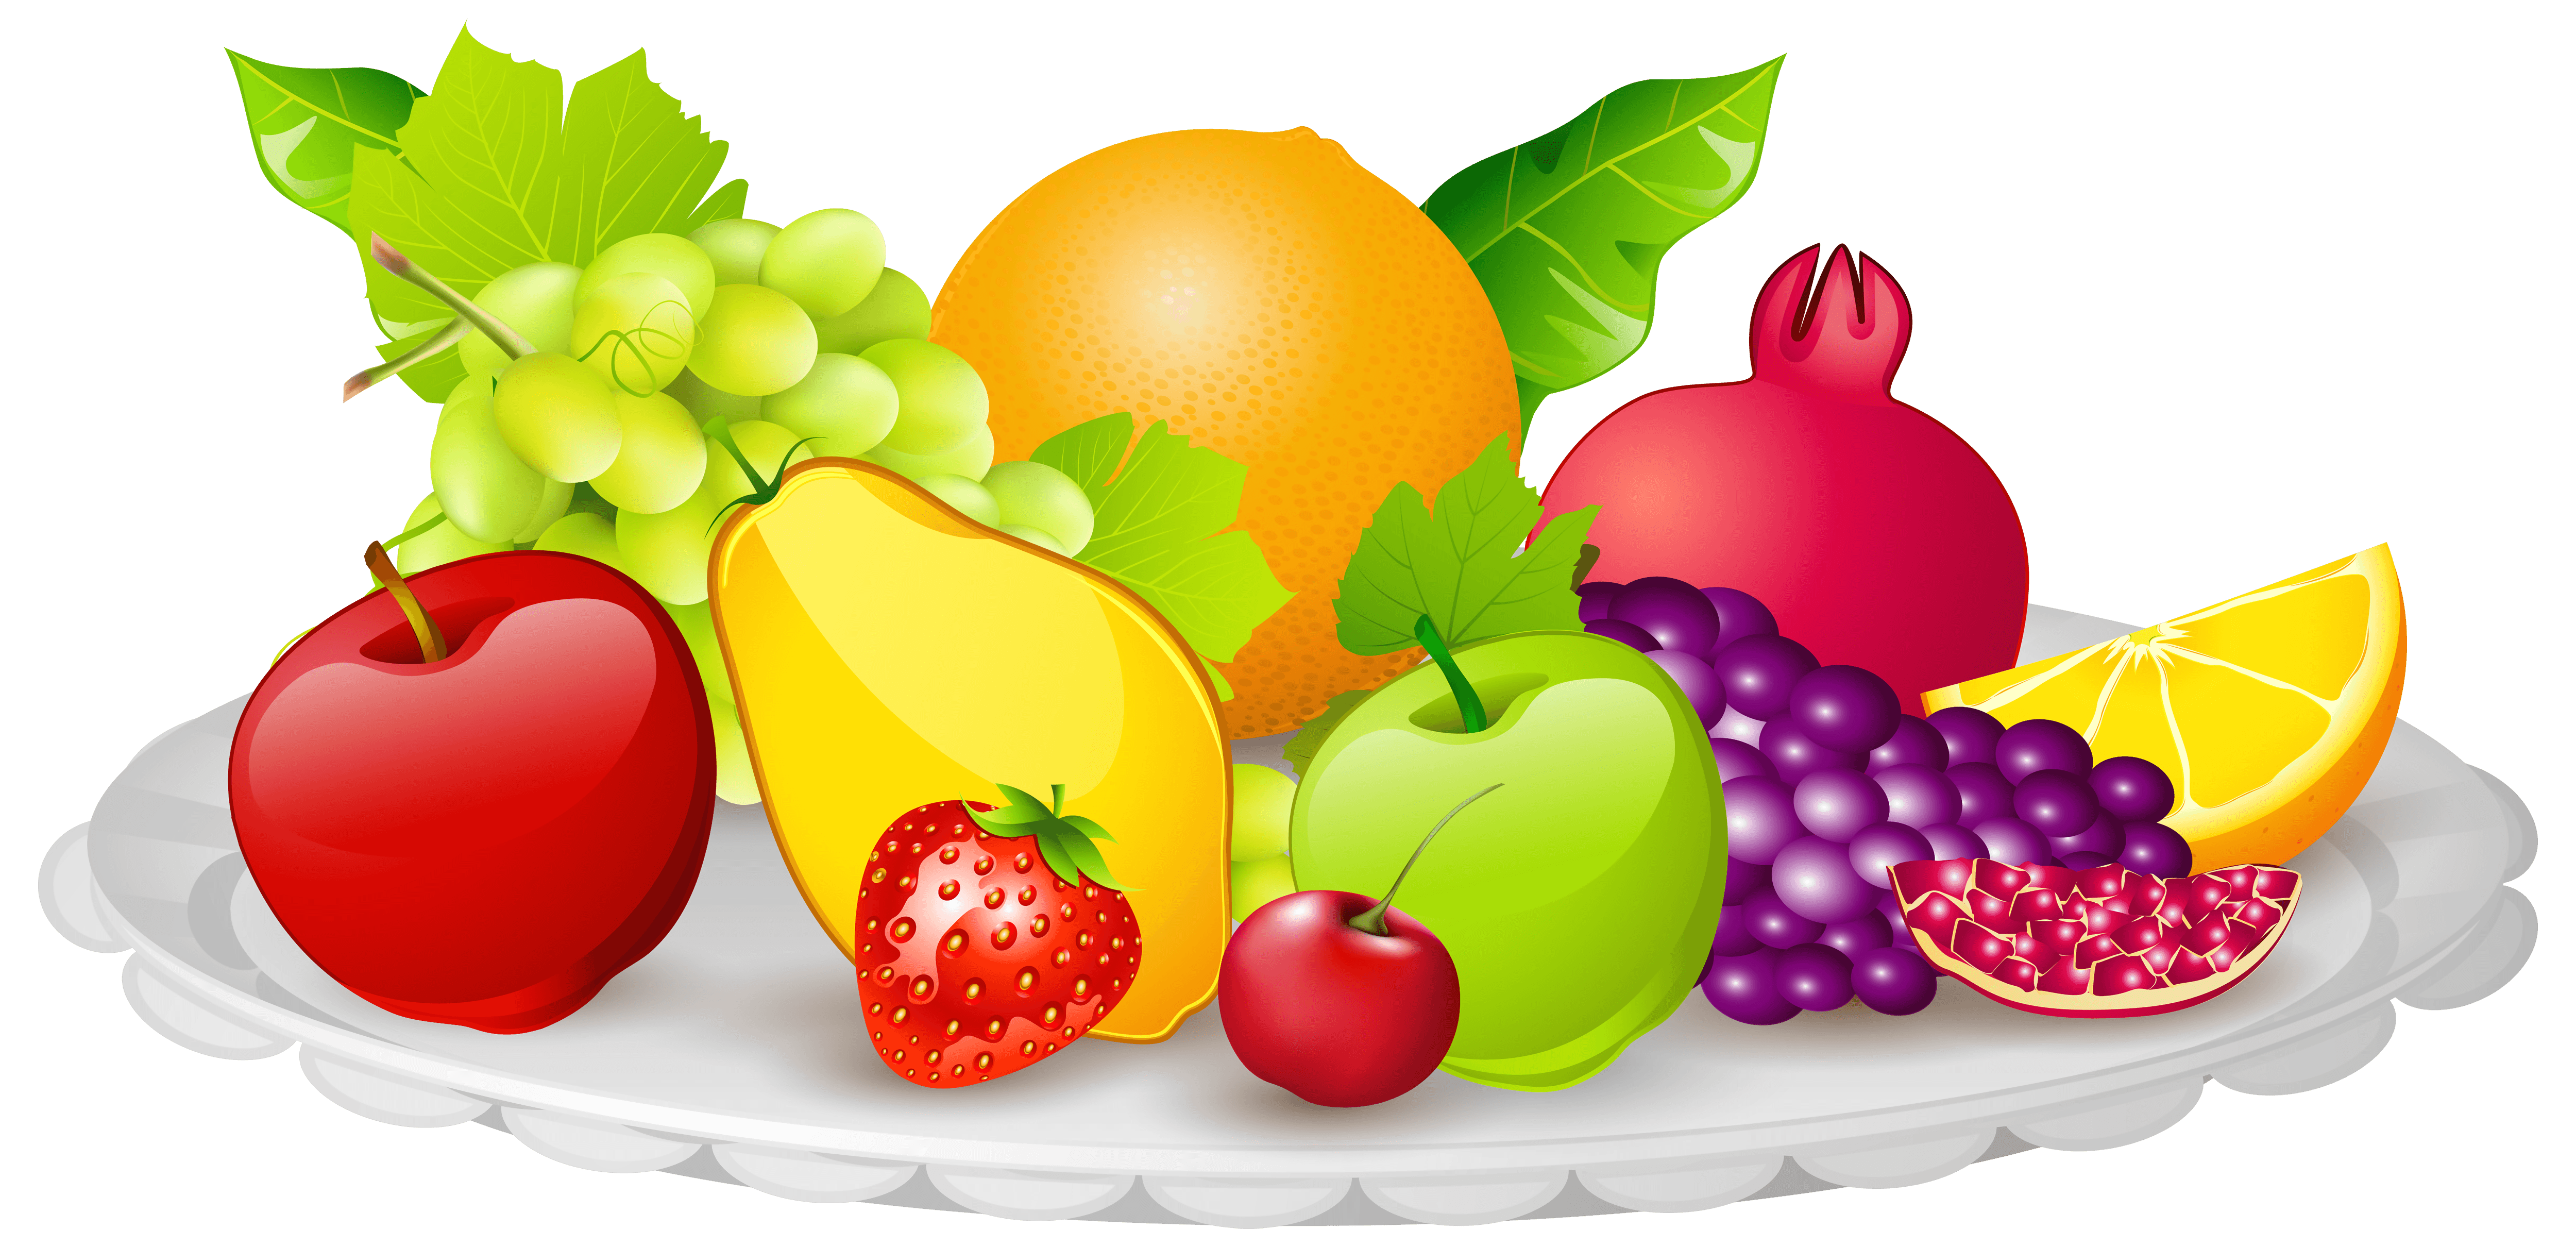 Plate with Fruits PNG Clipart Image